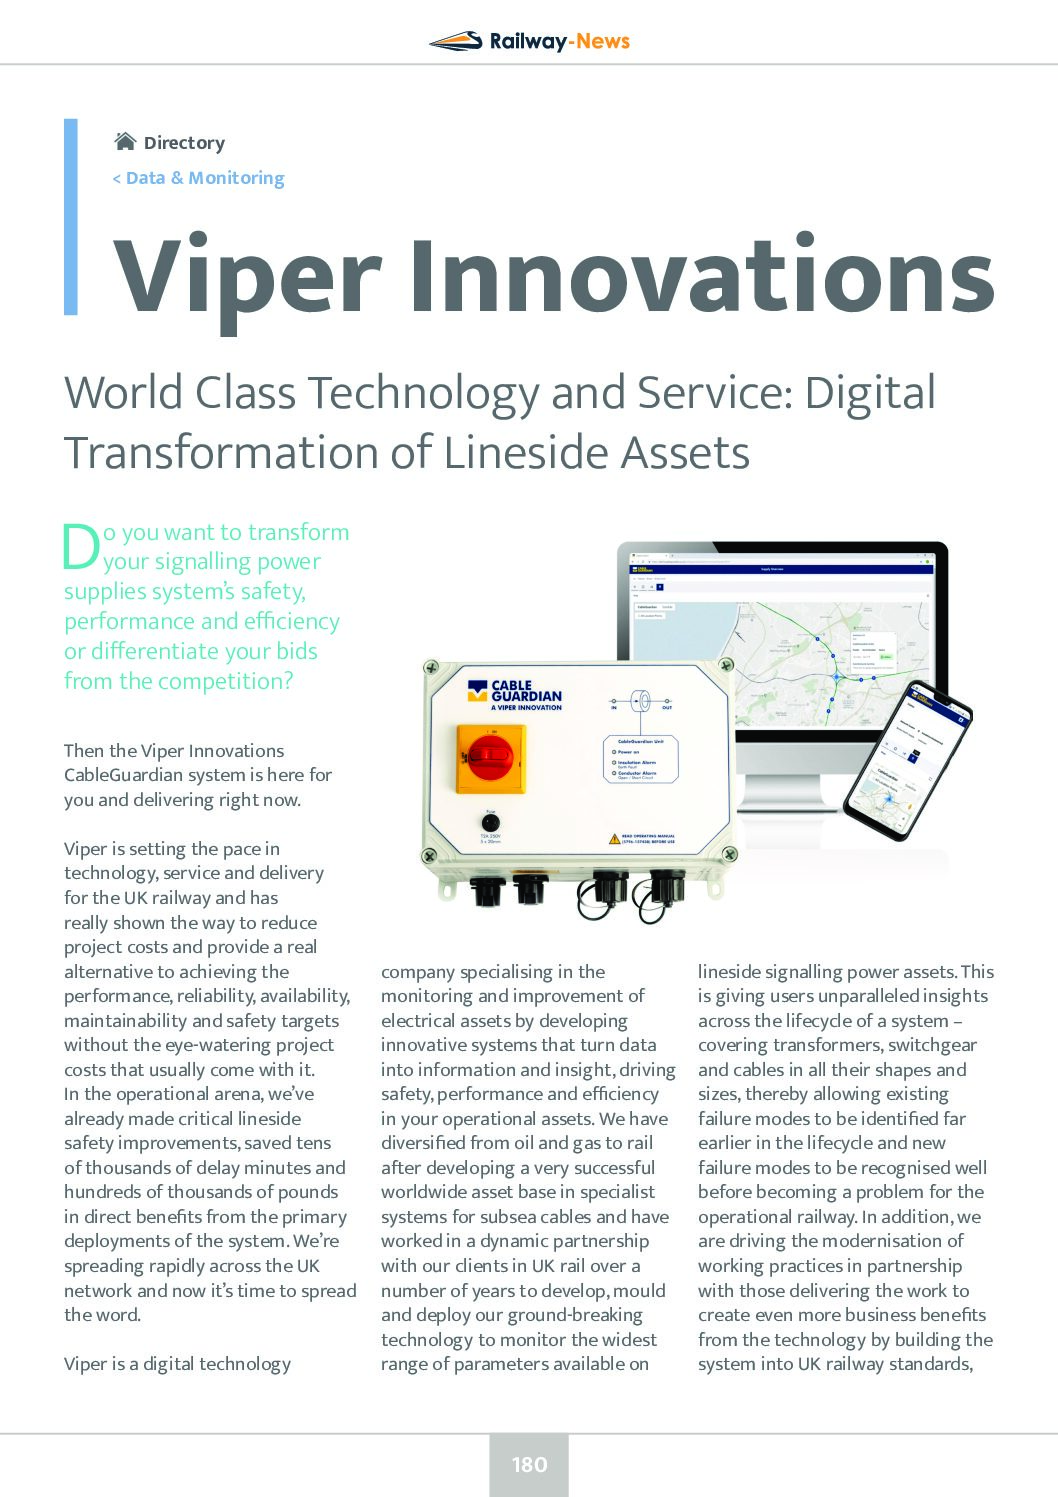 World Class Technology and Service: Digital Transformation of Lineside Assets